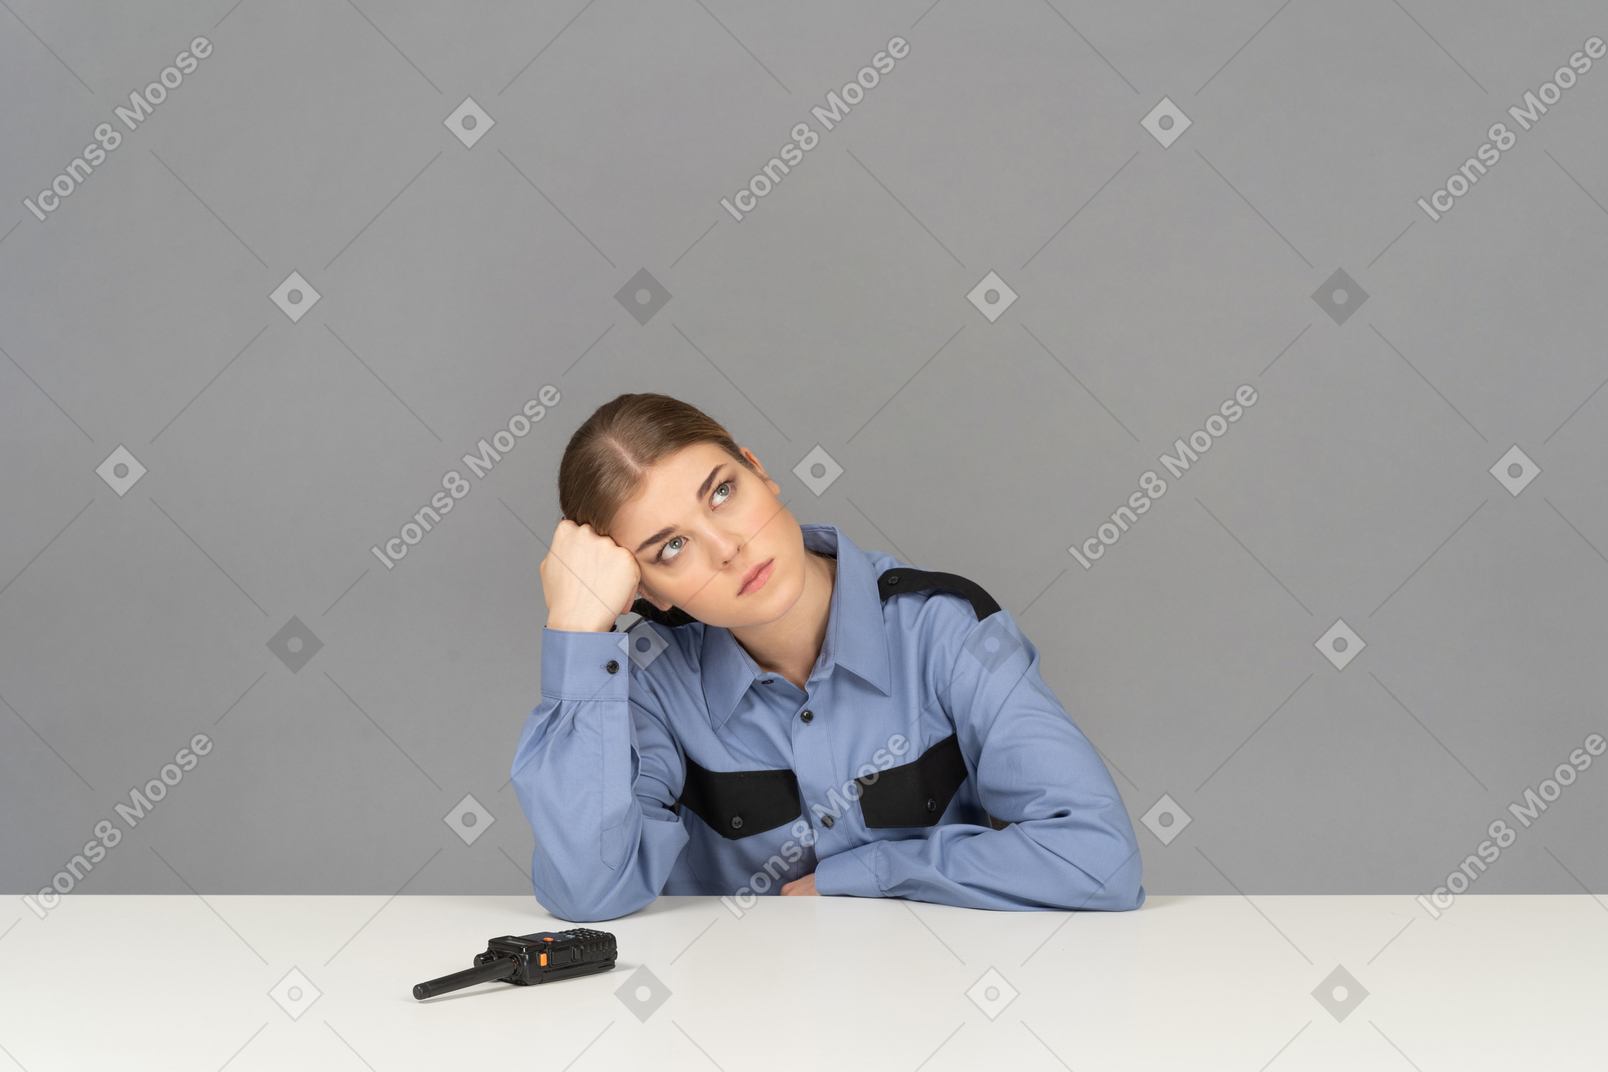 A bored female security guard leaning on her hand